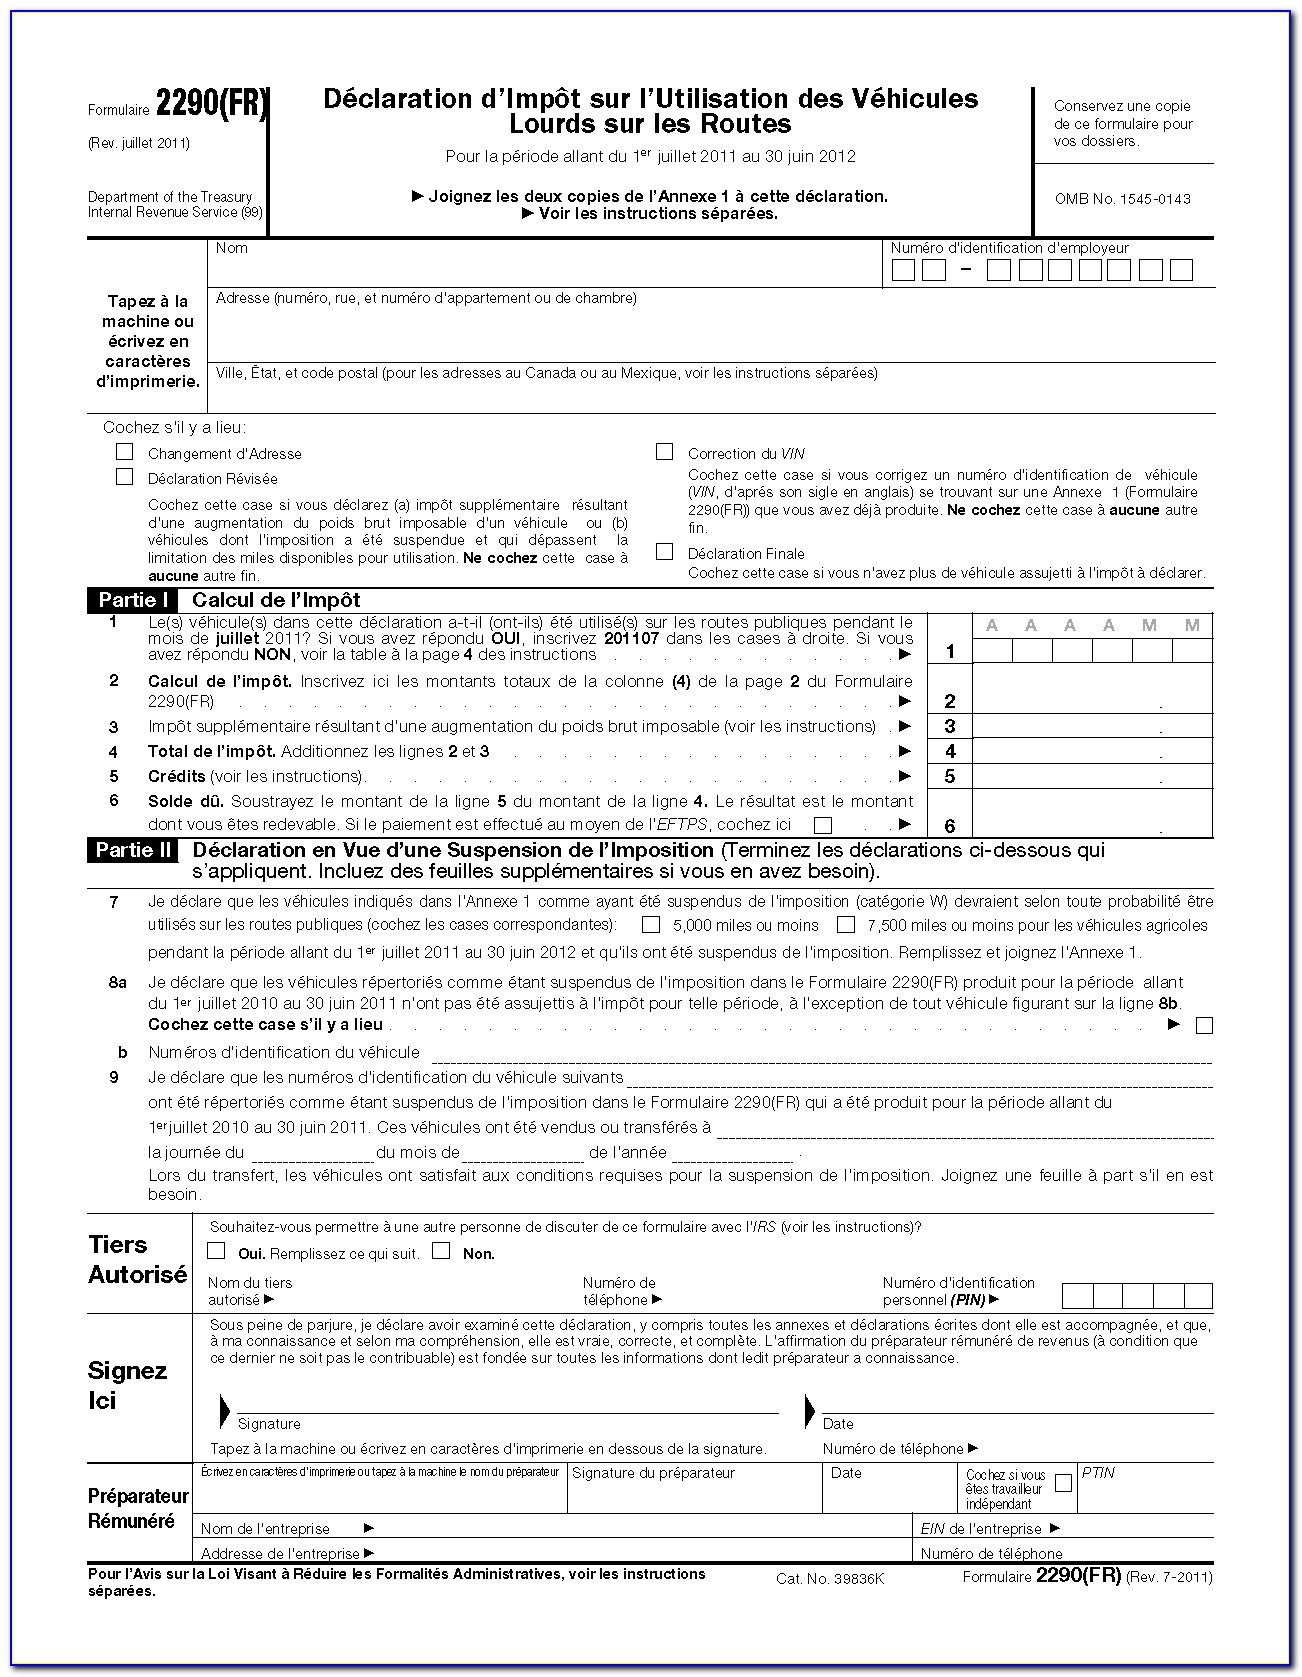 When Is Federal Form 2290 Due